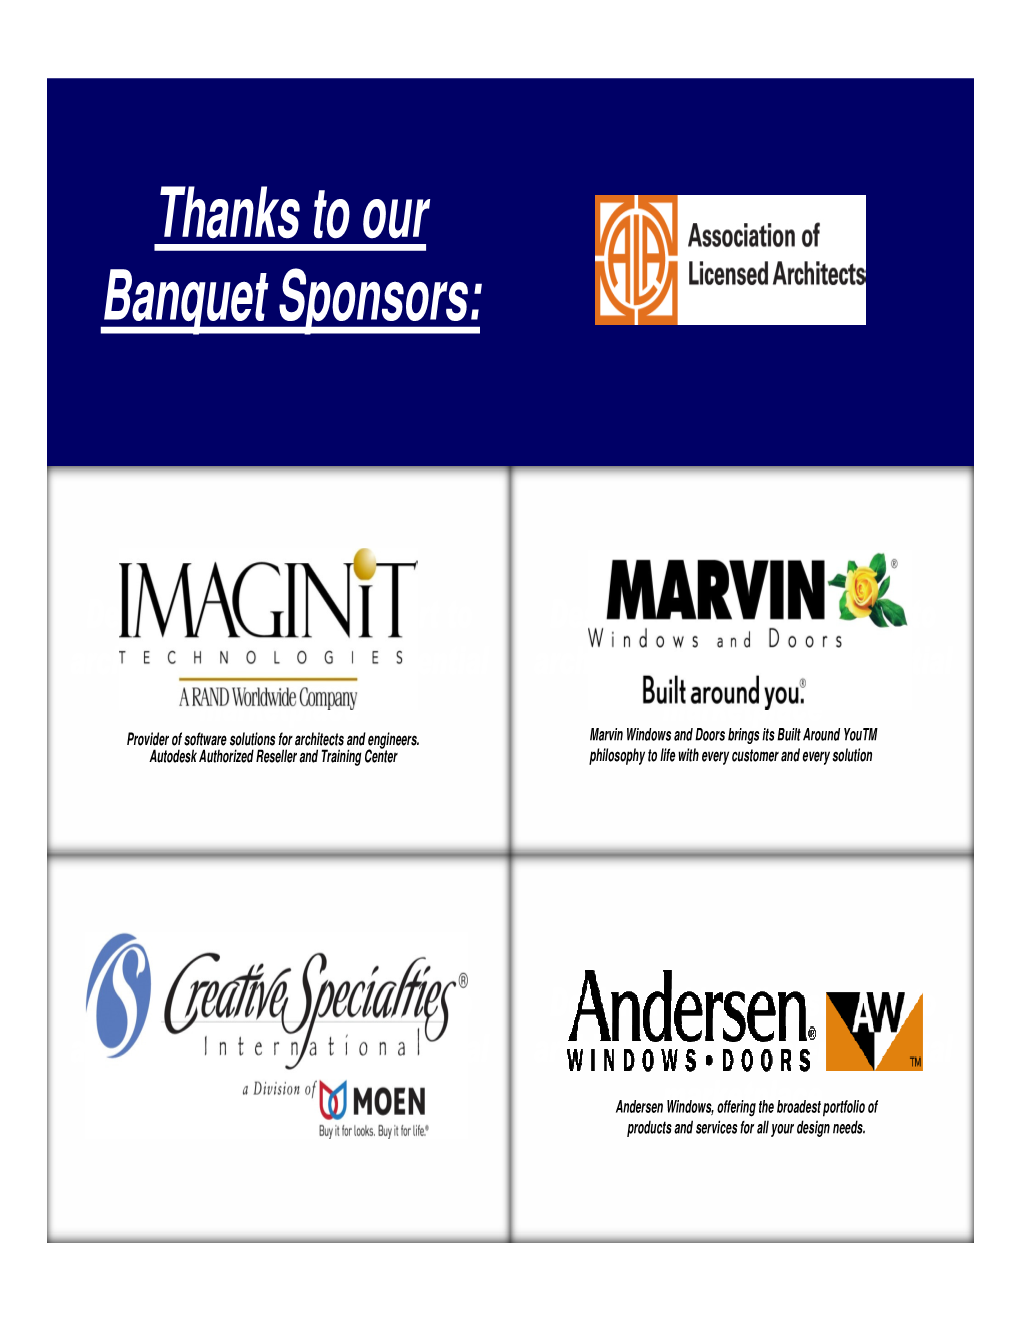 Thanks to Our Banquet Sponsors